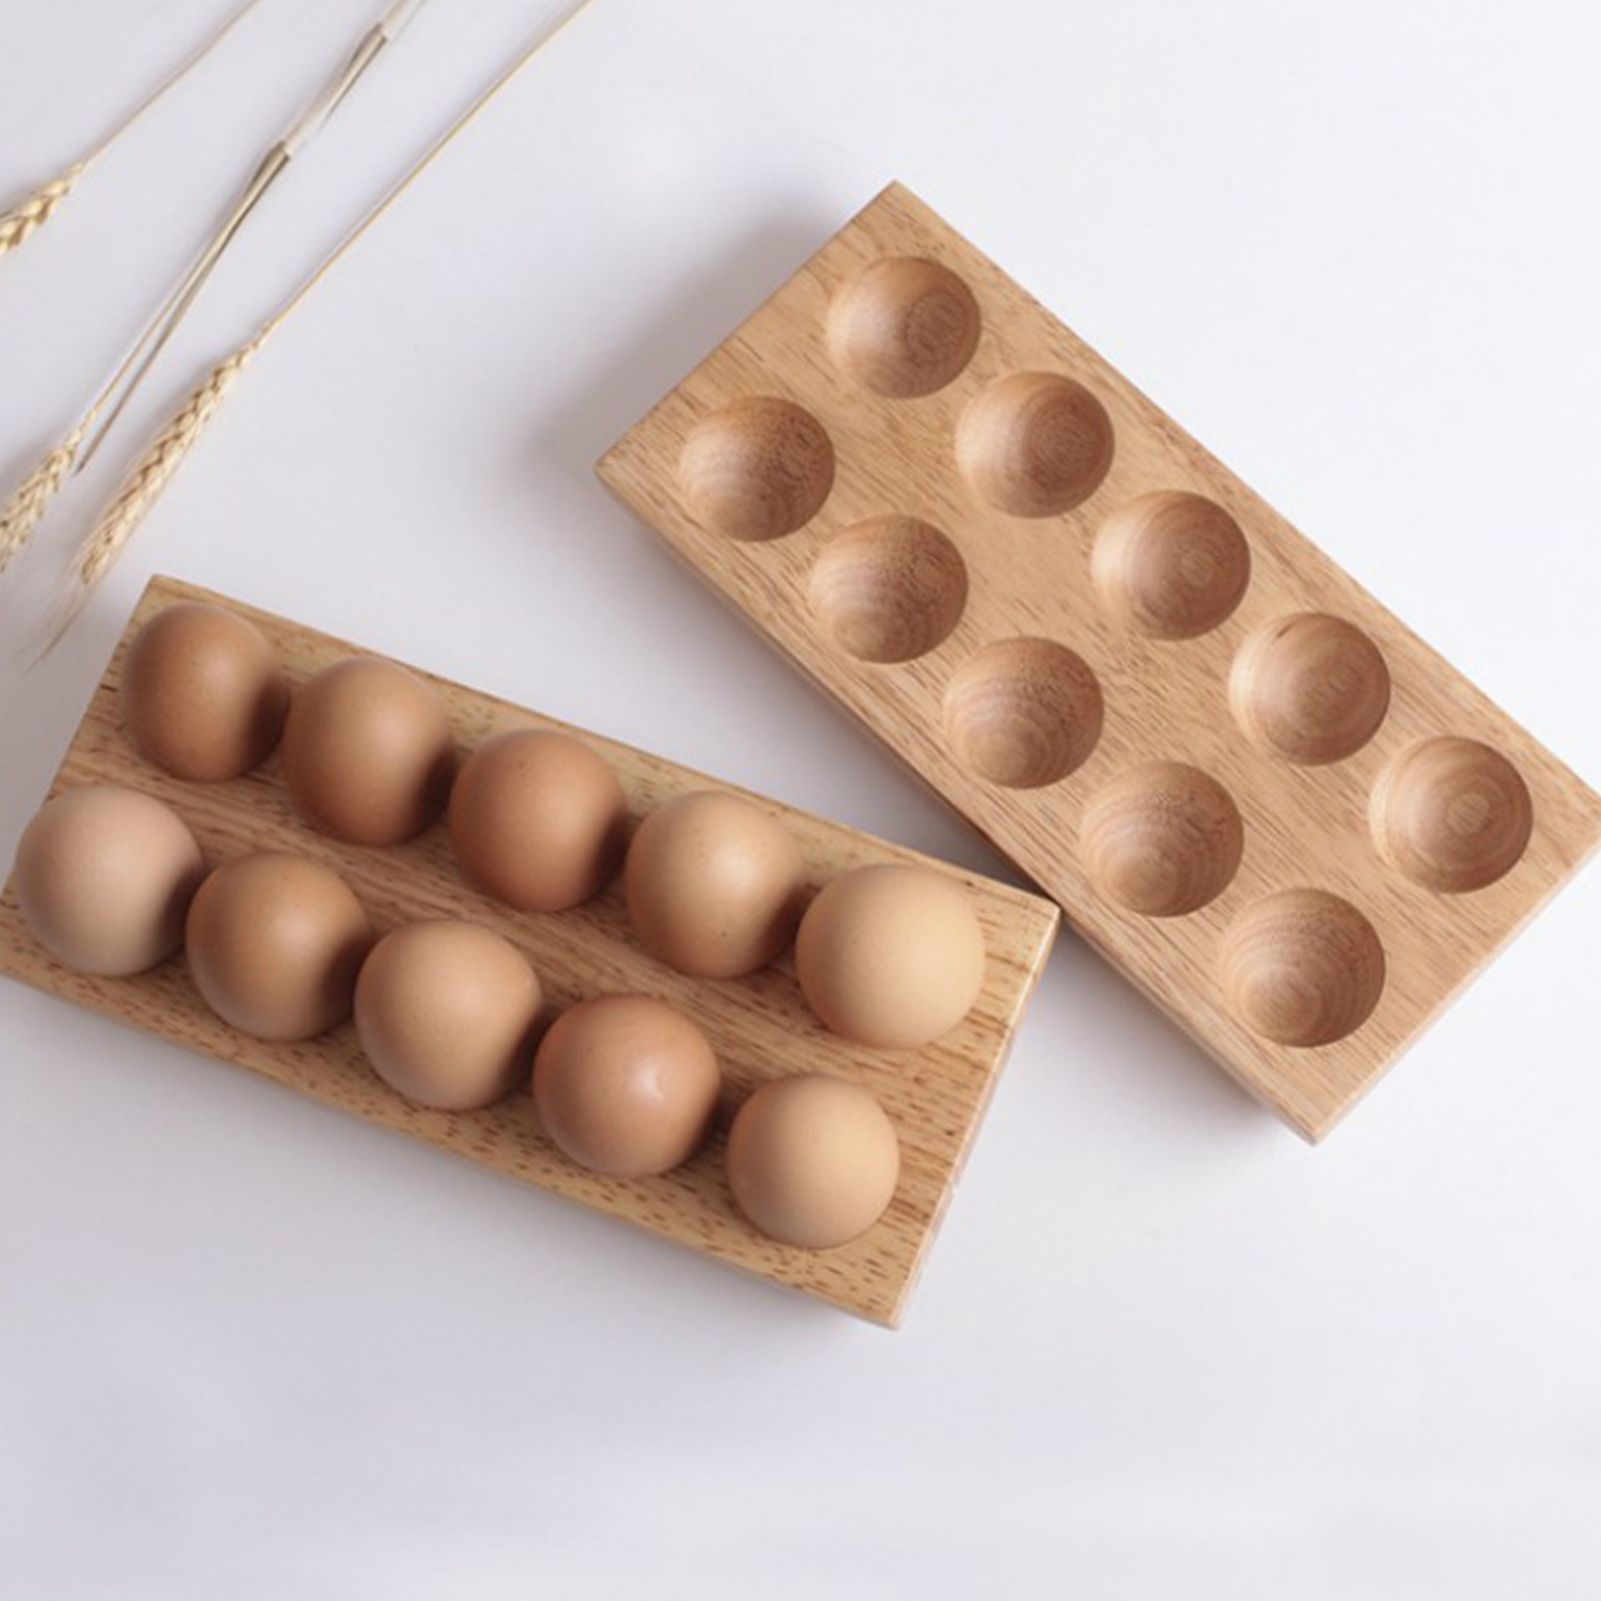 Yesbay Wooden Egg Holder 10 Grids Double Row Eggs Storage Plate for Home,Solid Wood | Walmart (US)